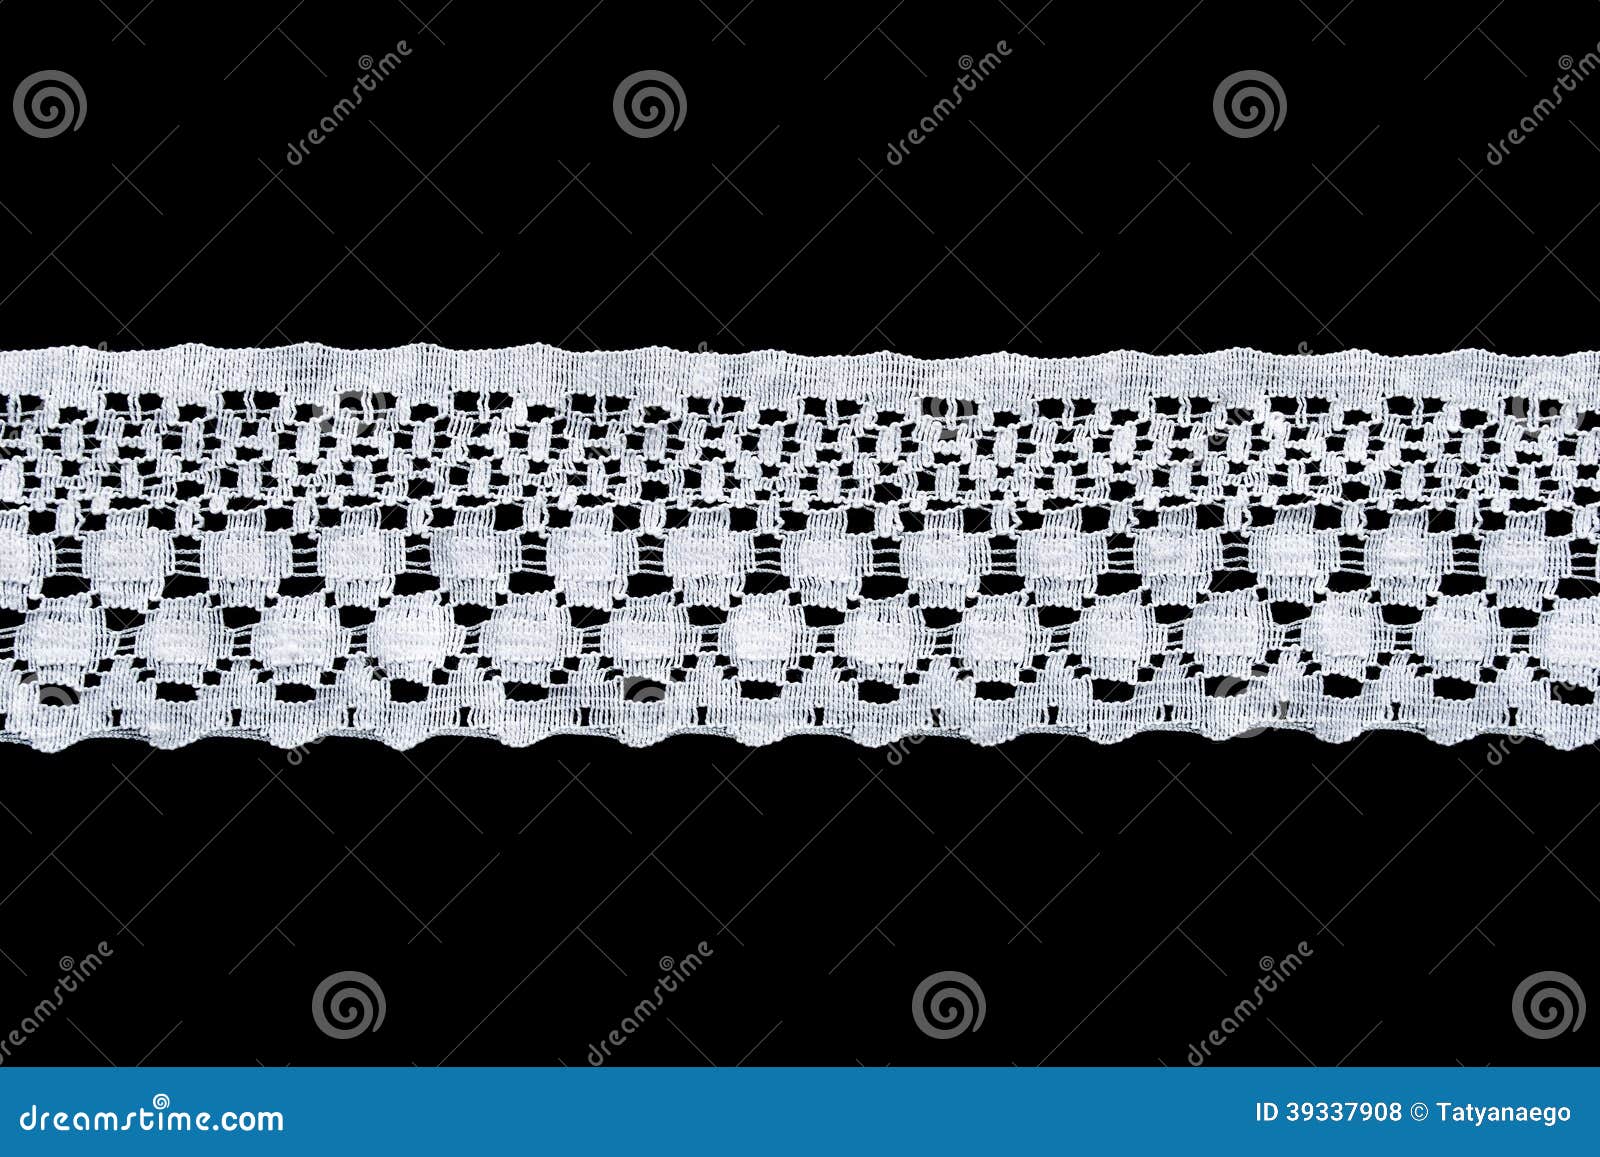 Strip of black lace stock photo. Image of design, texture - 12876992